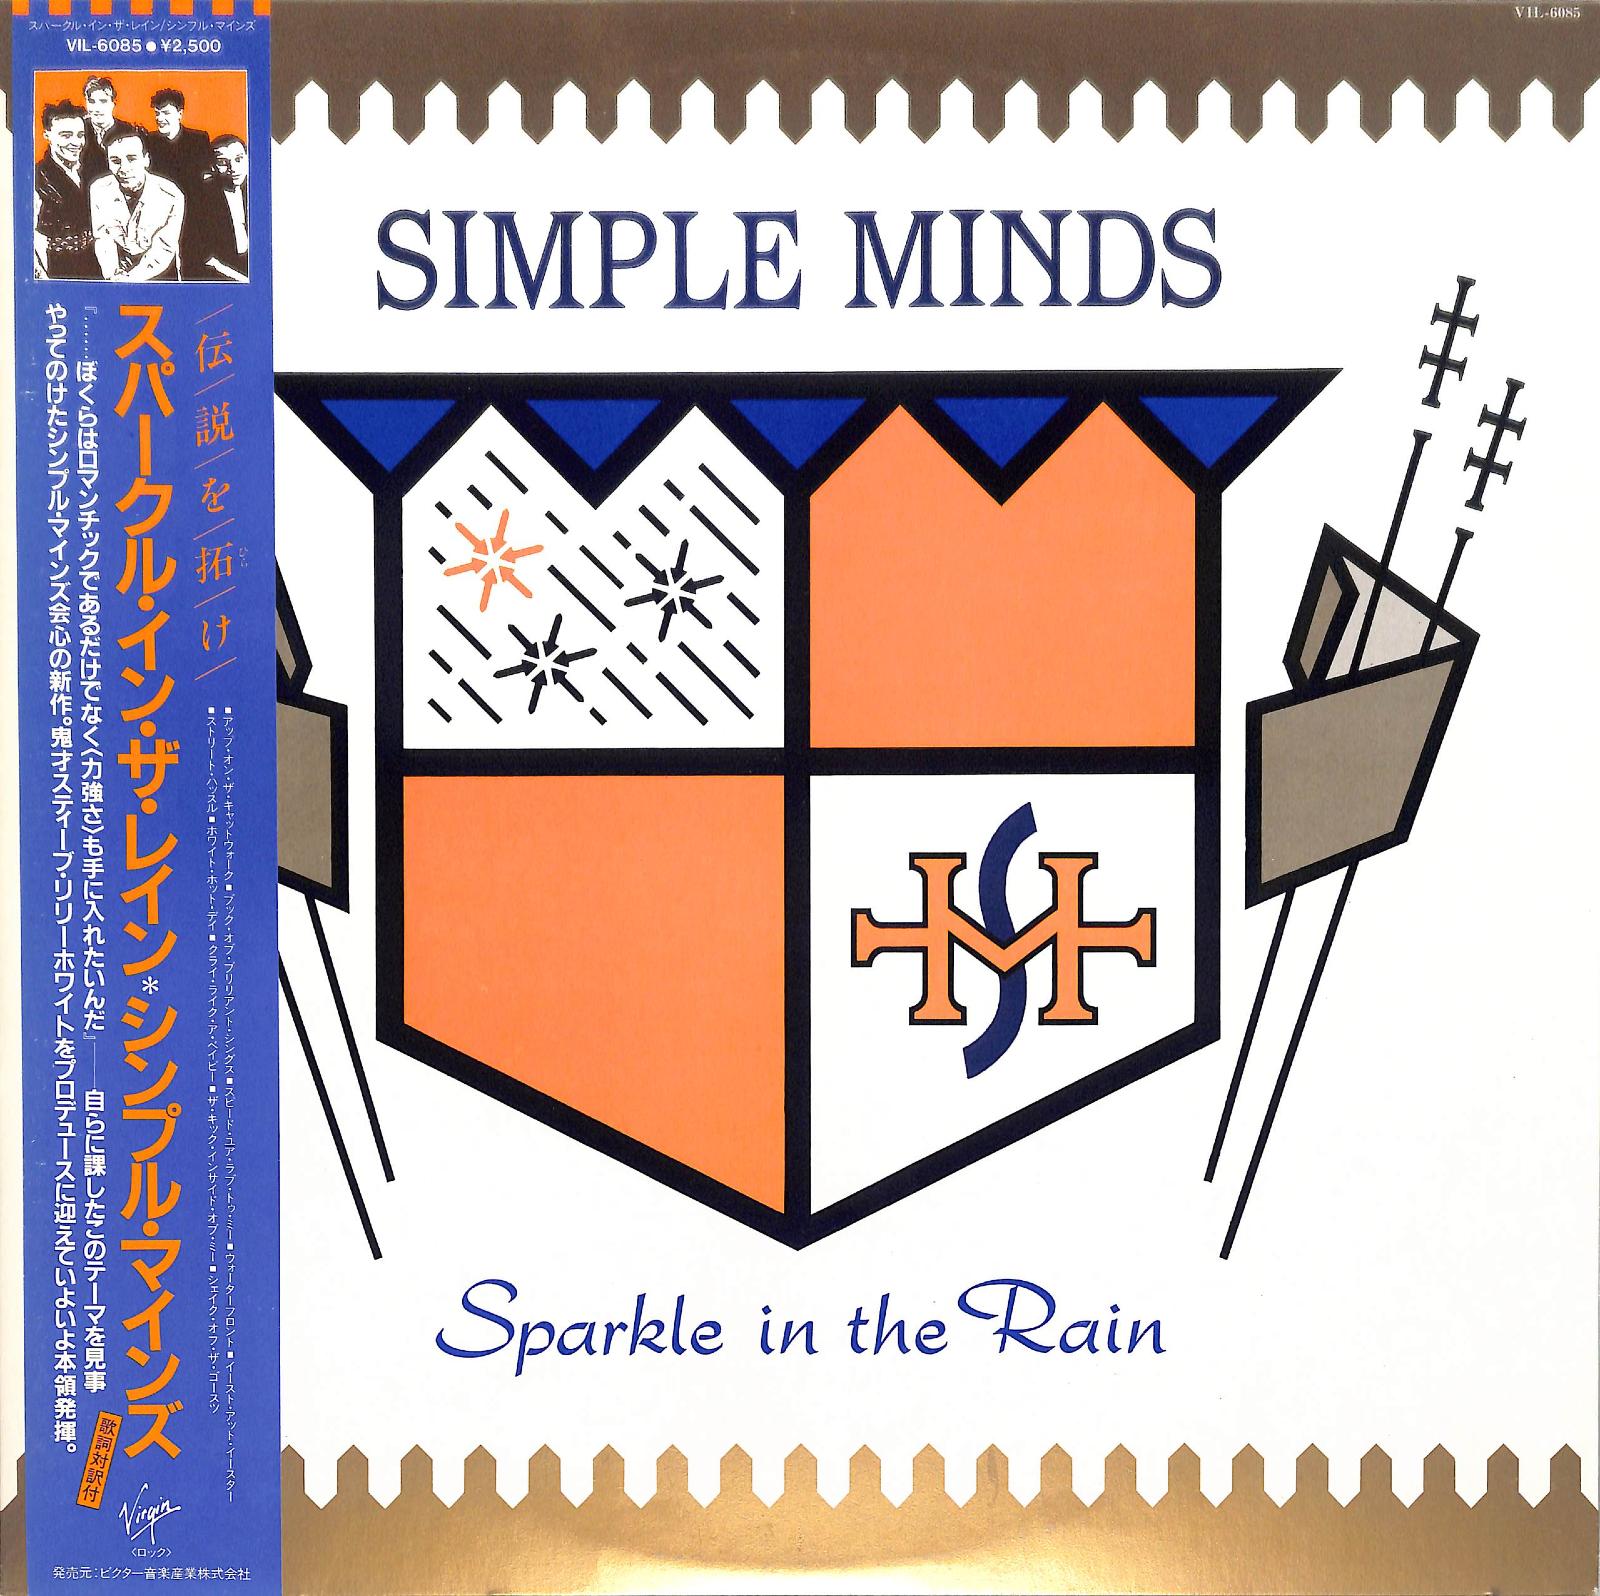 SIMPLE MINDS - Sparkle In The Rain